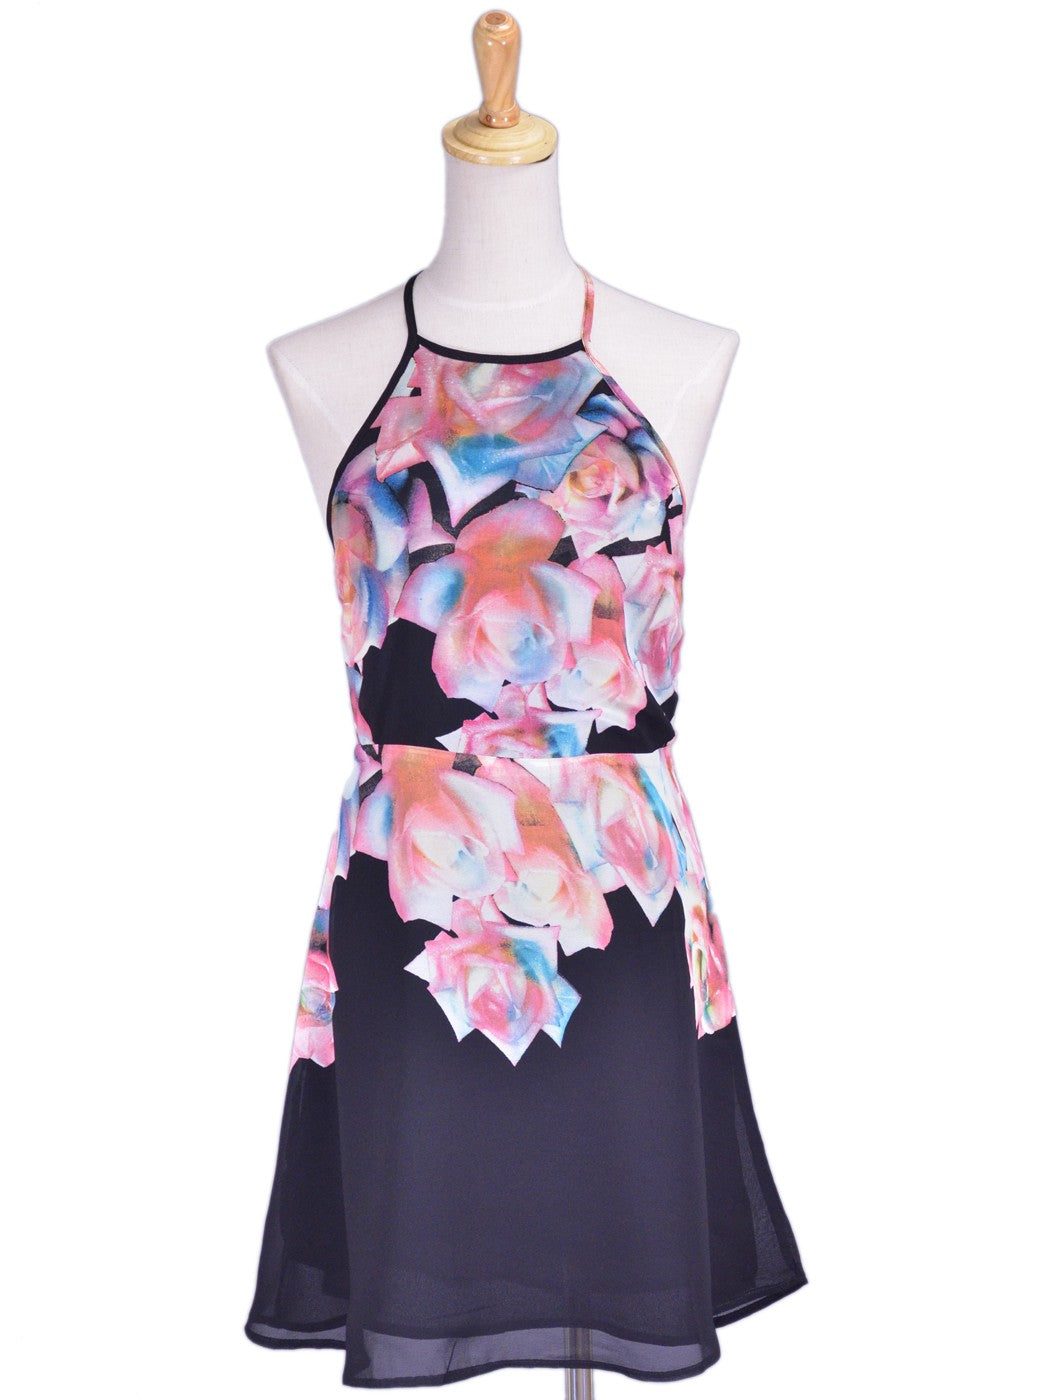 Cotton Candy Brand Black Pink Abstract Roses Halter Exposed Back Chiffon Dress